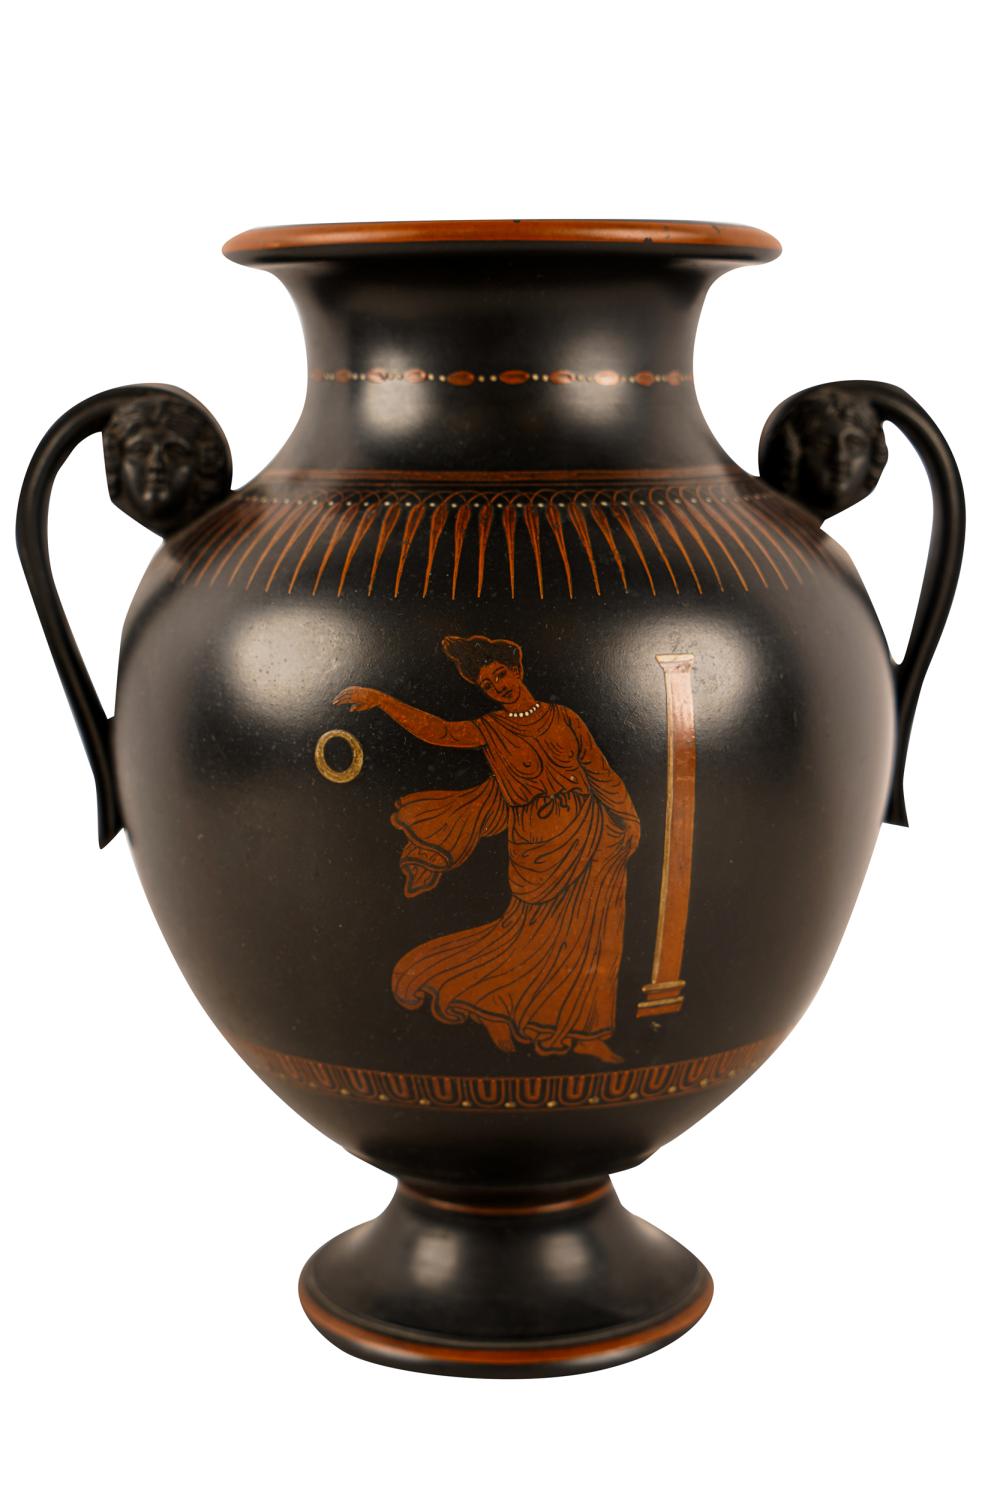 GREEK-STYLE RED-FIGURE POTTERY